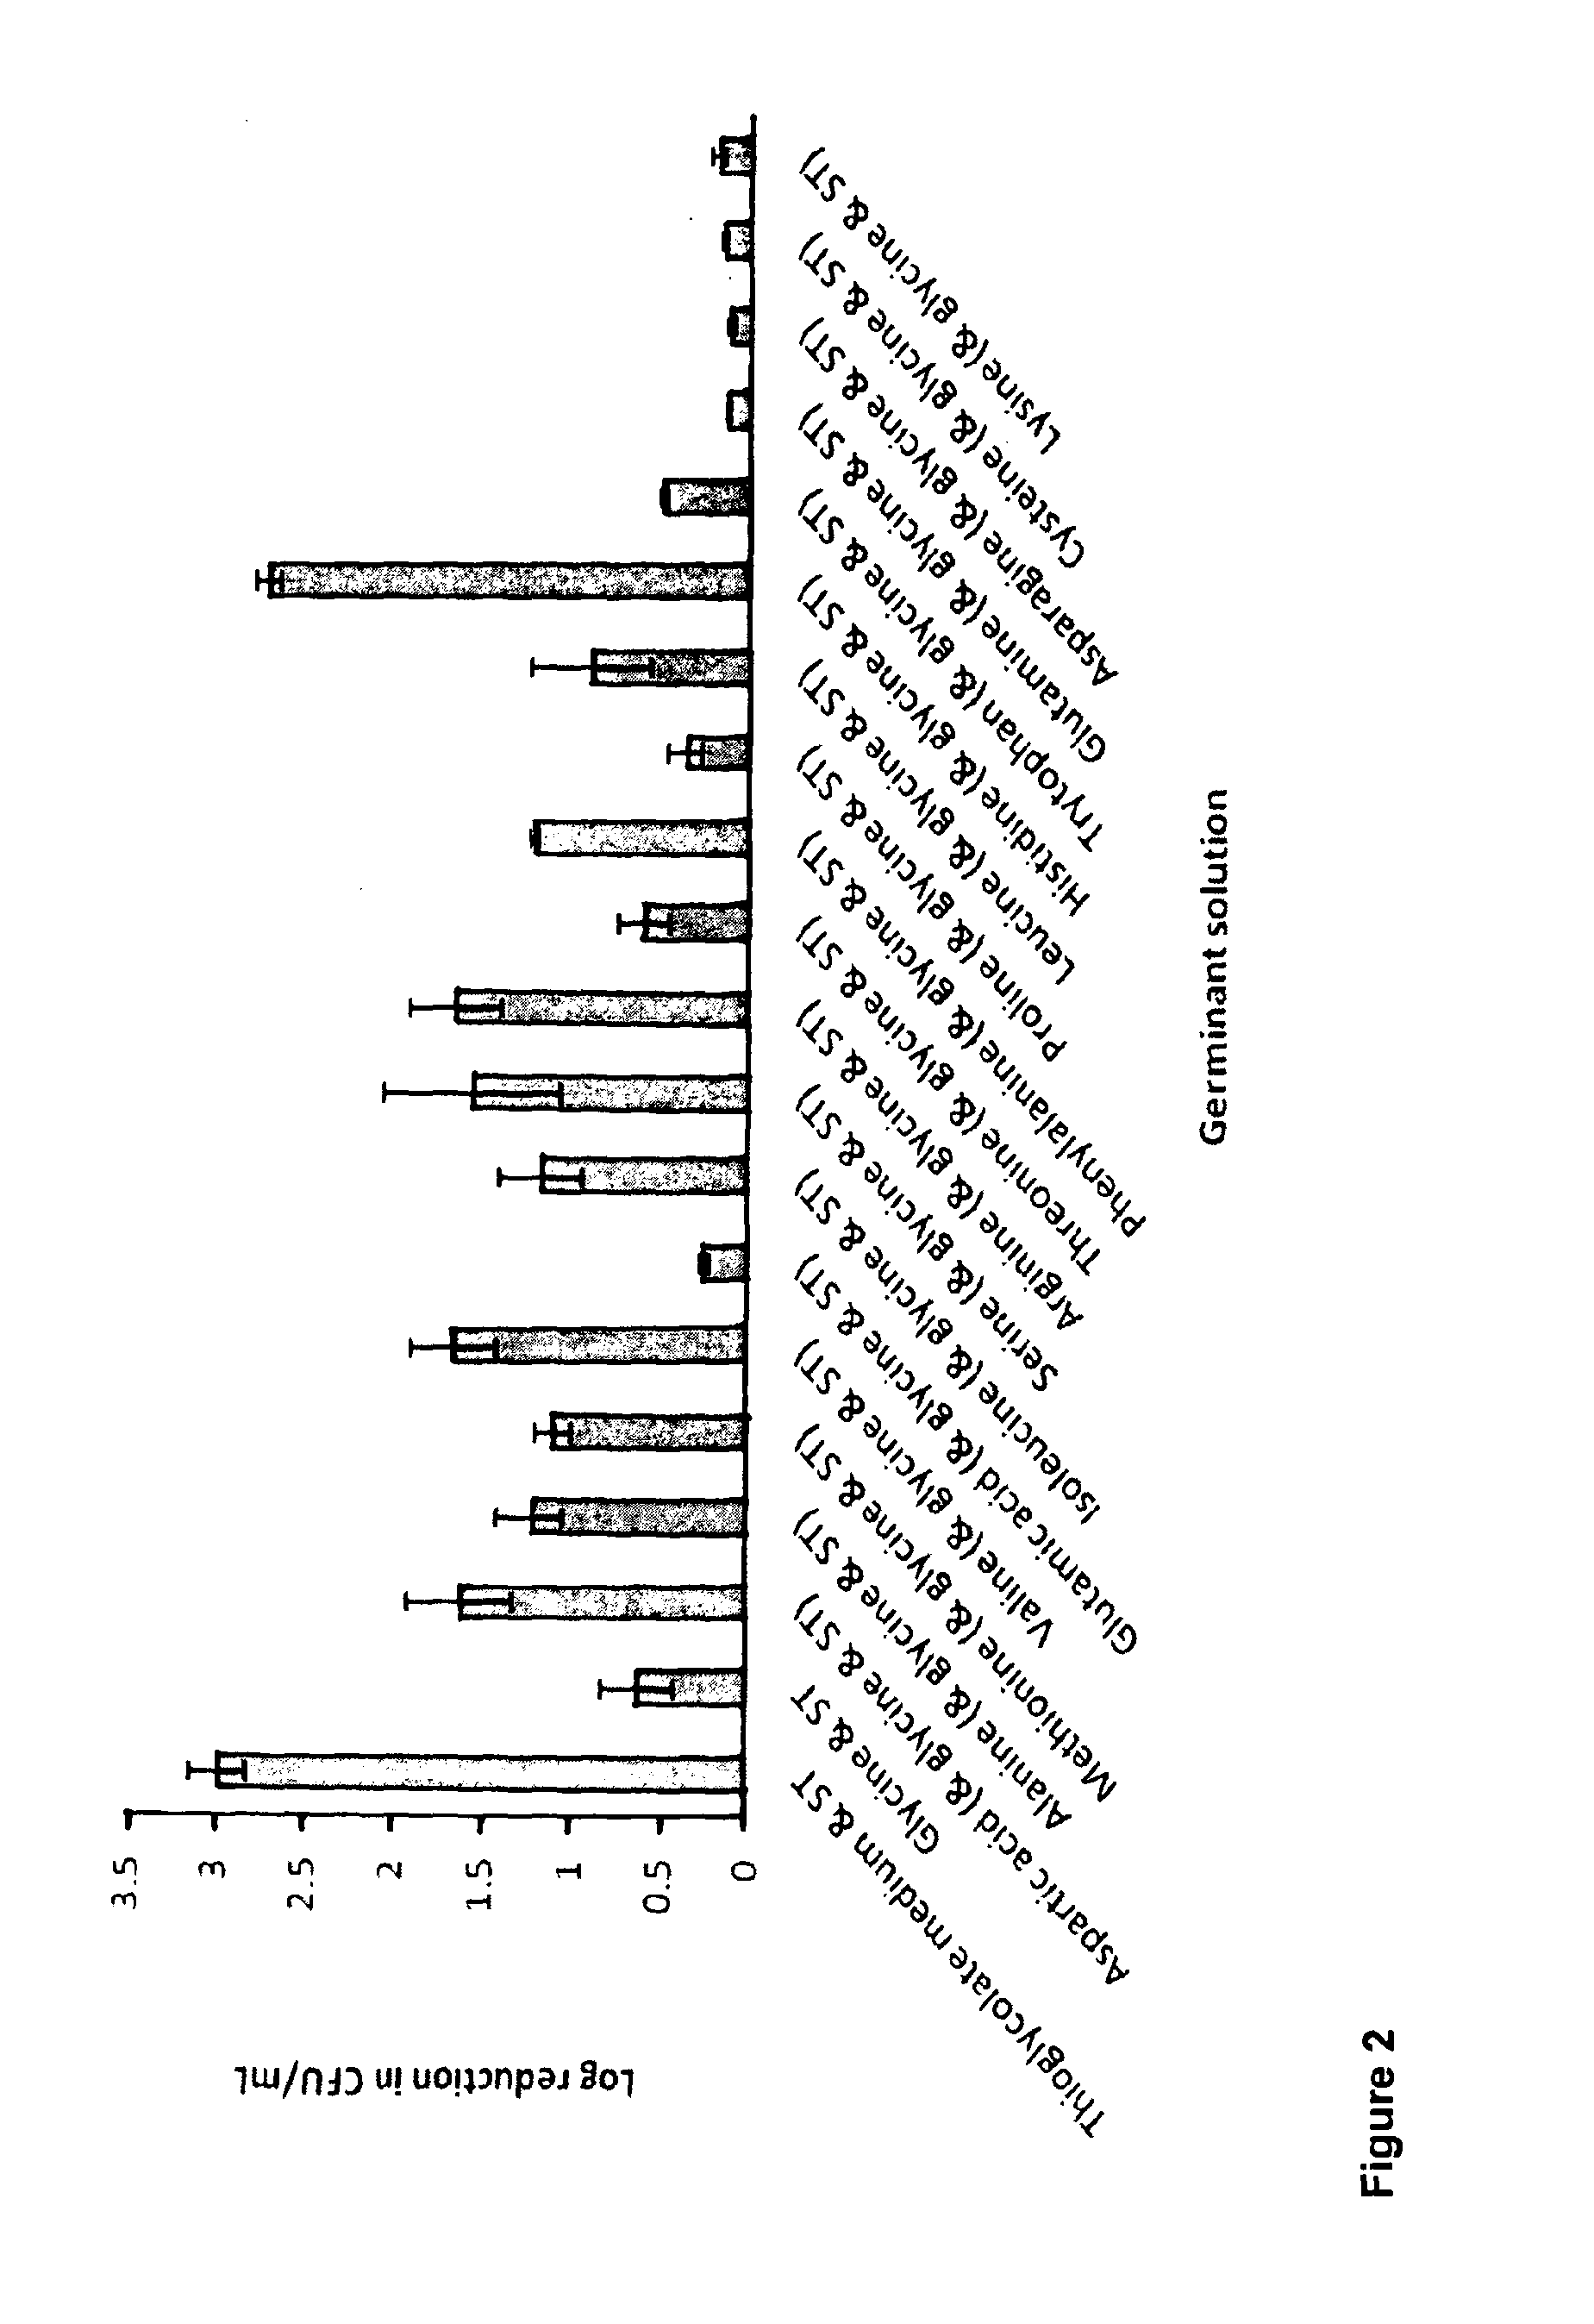 Compositions comprising a germinant and an antimicrobial agent